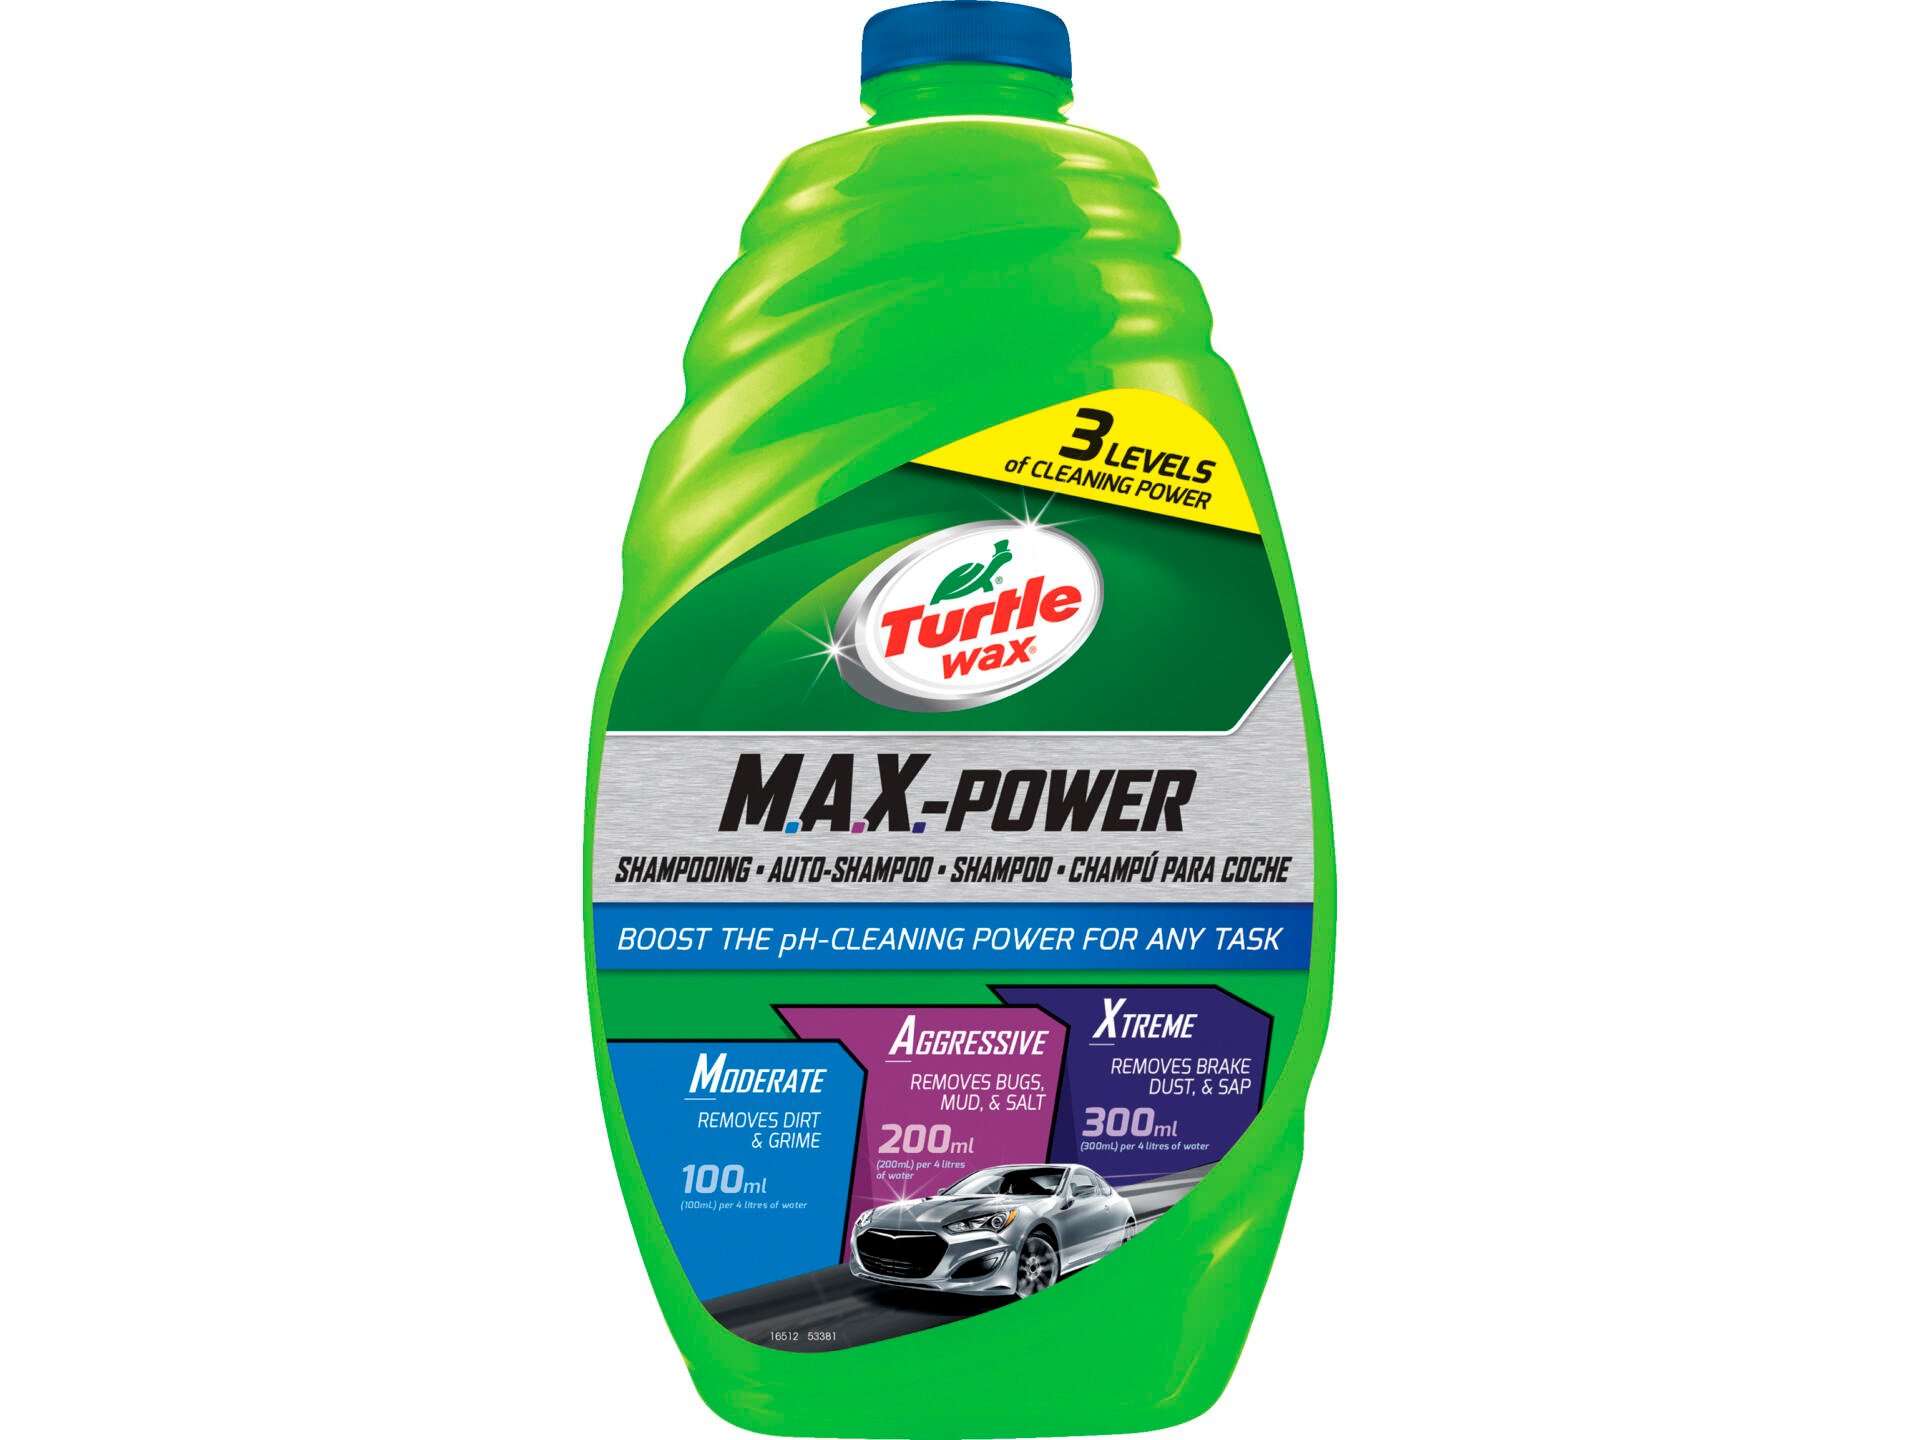 Turtle Wax M.A.X.-Power shampooing voiture 1,42l